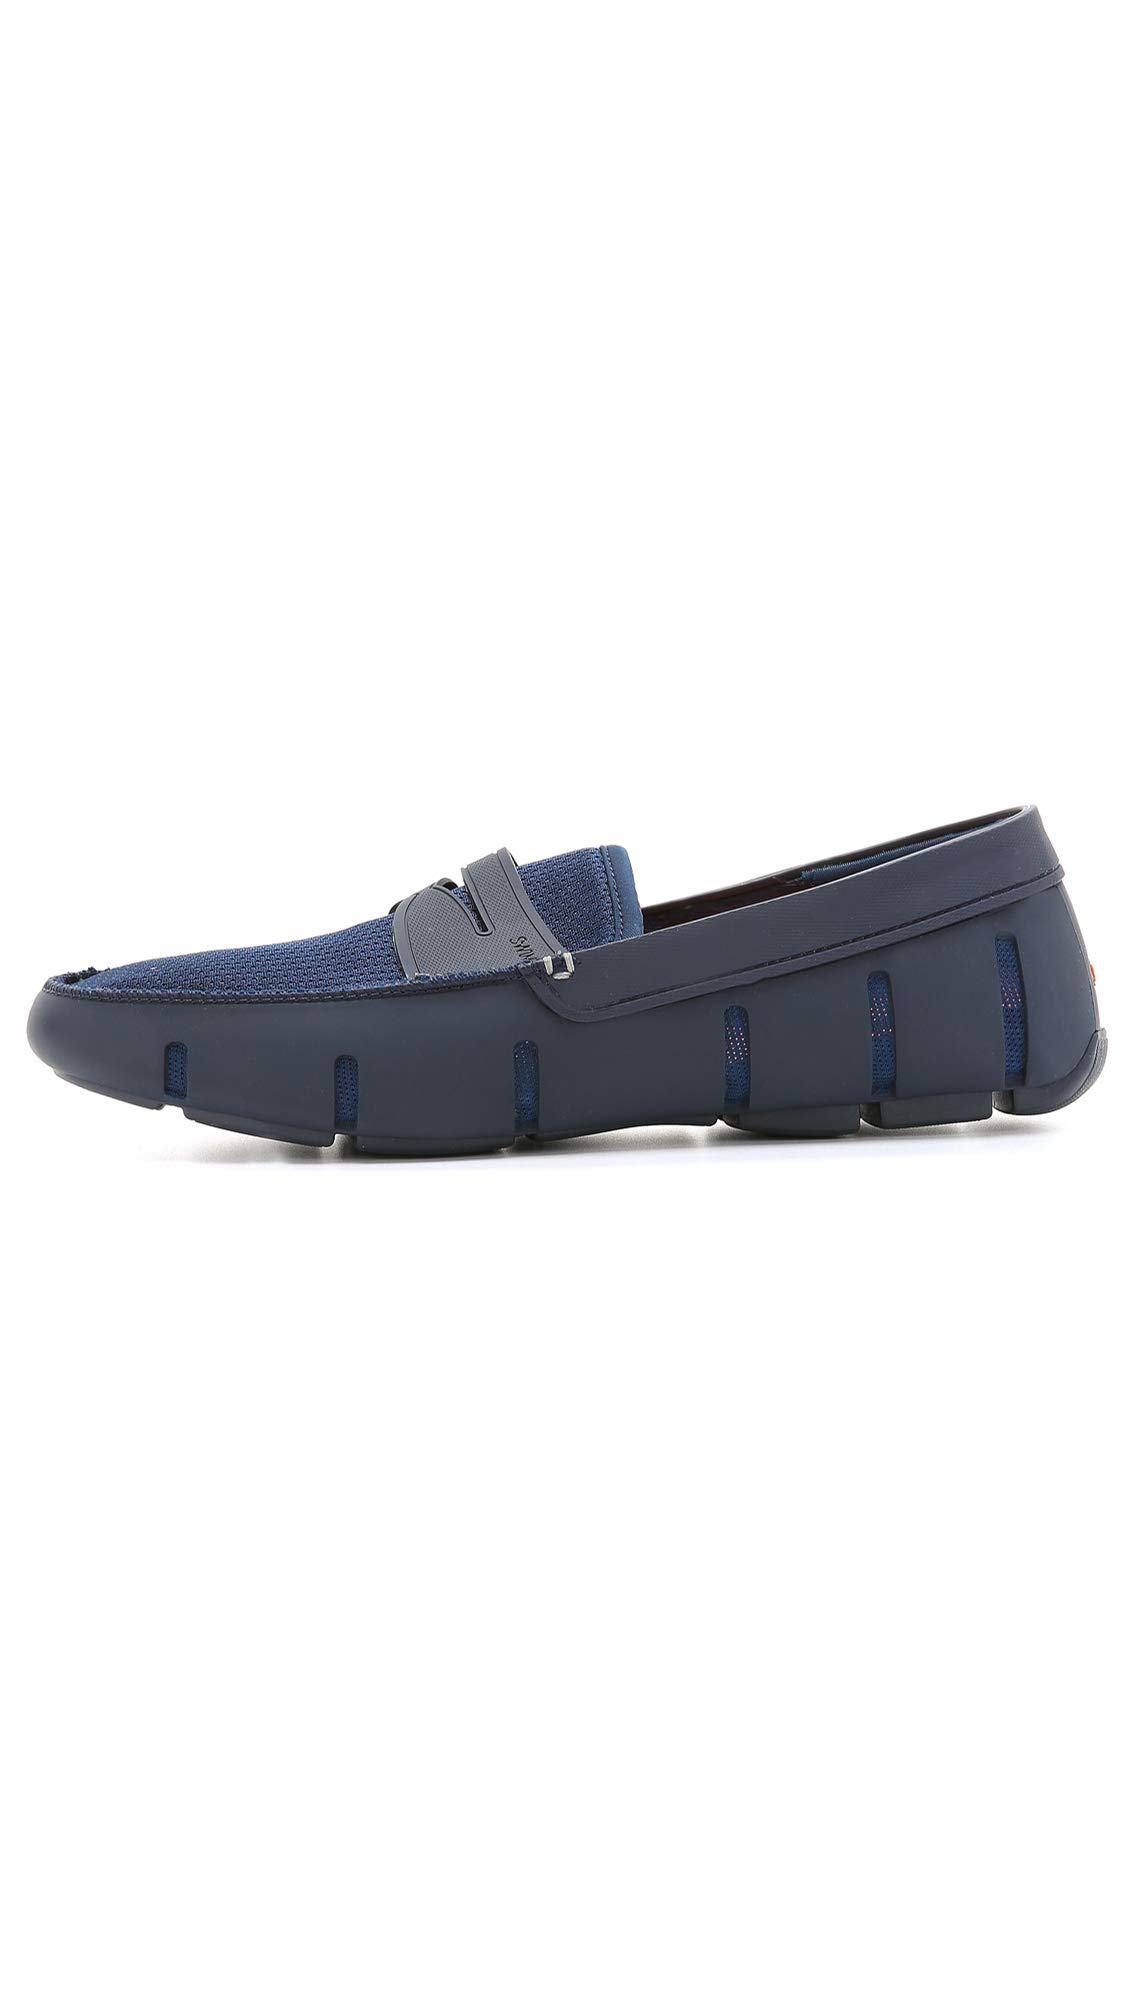 SWIMS Mens Loafers, Casual Summer Lightweight Dress Shoe, Penny Boat & Deck Shoes for Mens Footwear